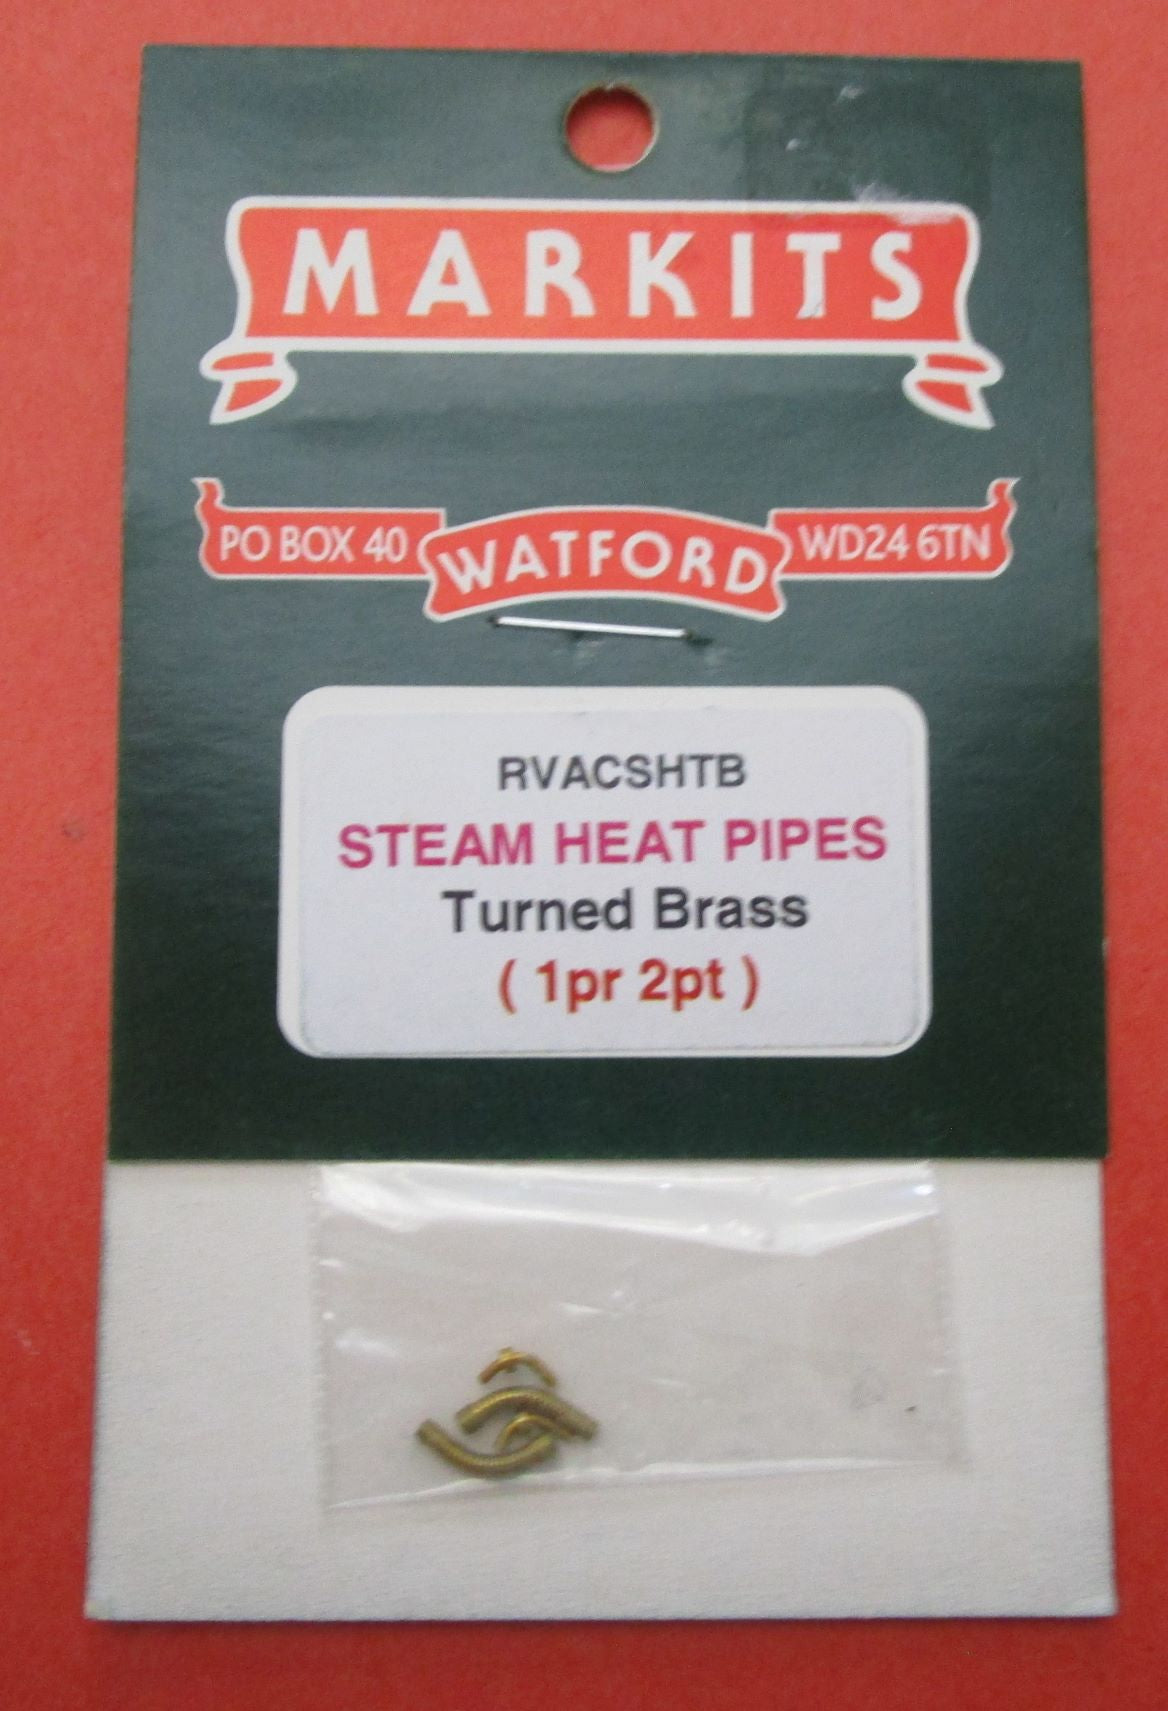 MVACSHTB MARKITS Steam Heat Pipes Turned Brass - pack of 2